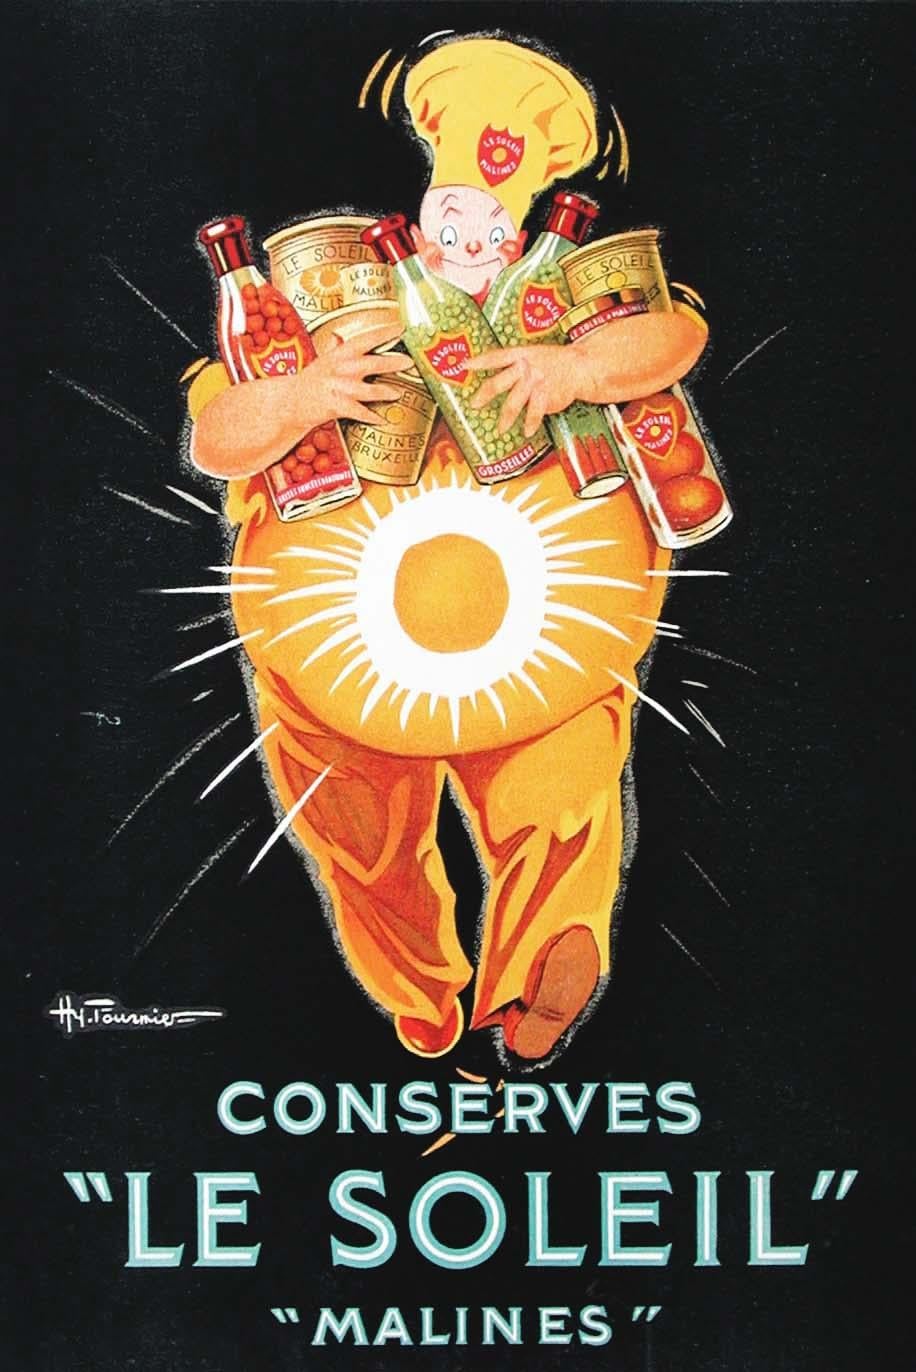 "Conserves 'Le Soleil'" small store advertising display 1930 with Chef - Print by H. Fournier